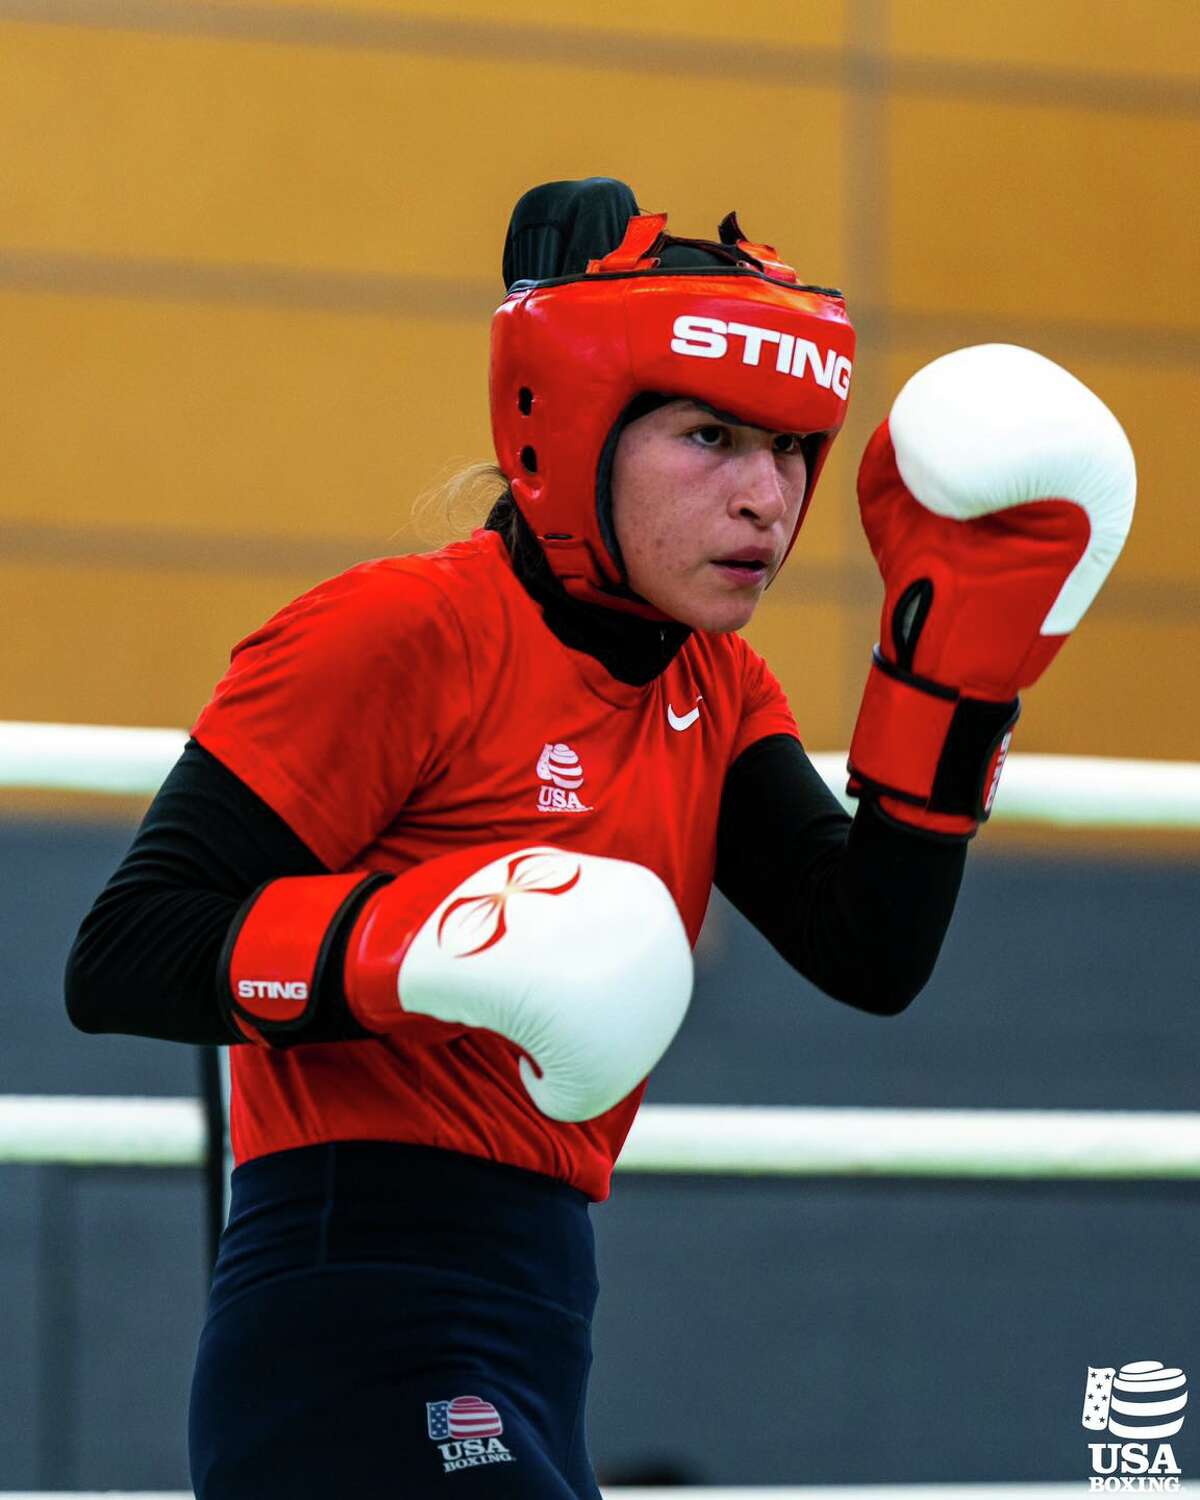 Jennifer Lozano and the USA Boxing High Performance Team begin competing in the 53rd Grand Prix in Usti and Labem, Czech Republic on Thursday, May 4.